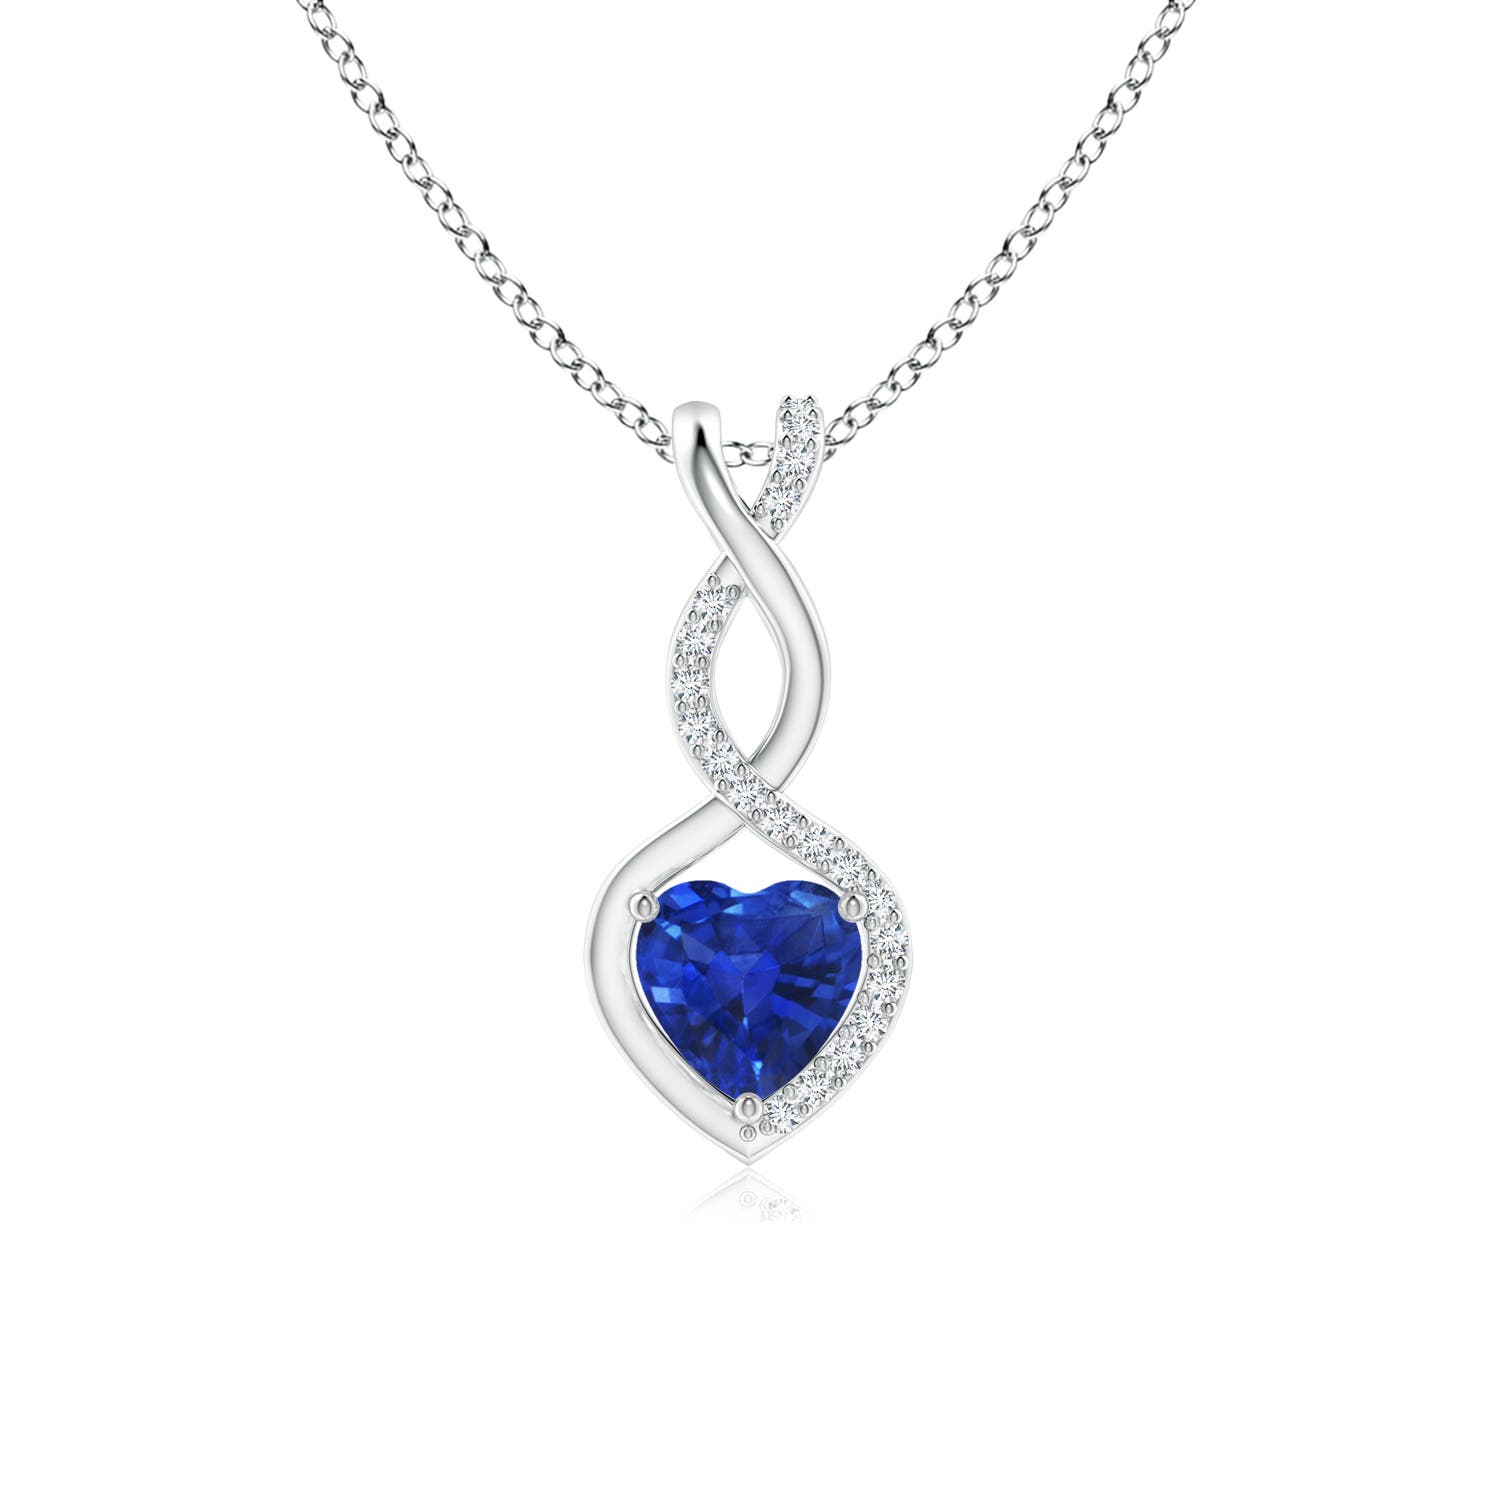 AAA - Blue Sapphire / 0.54 CT / 14 KT White Gold